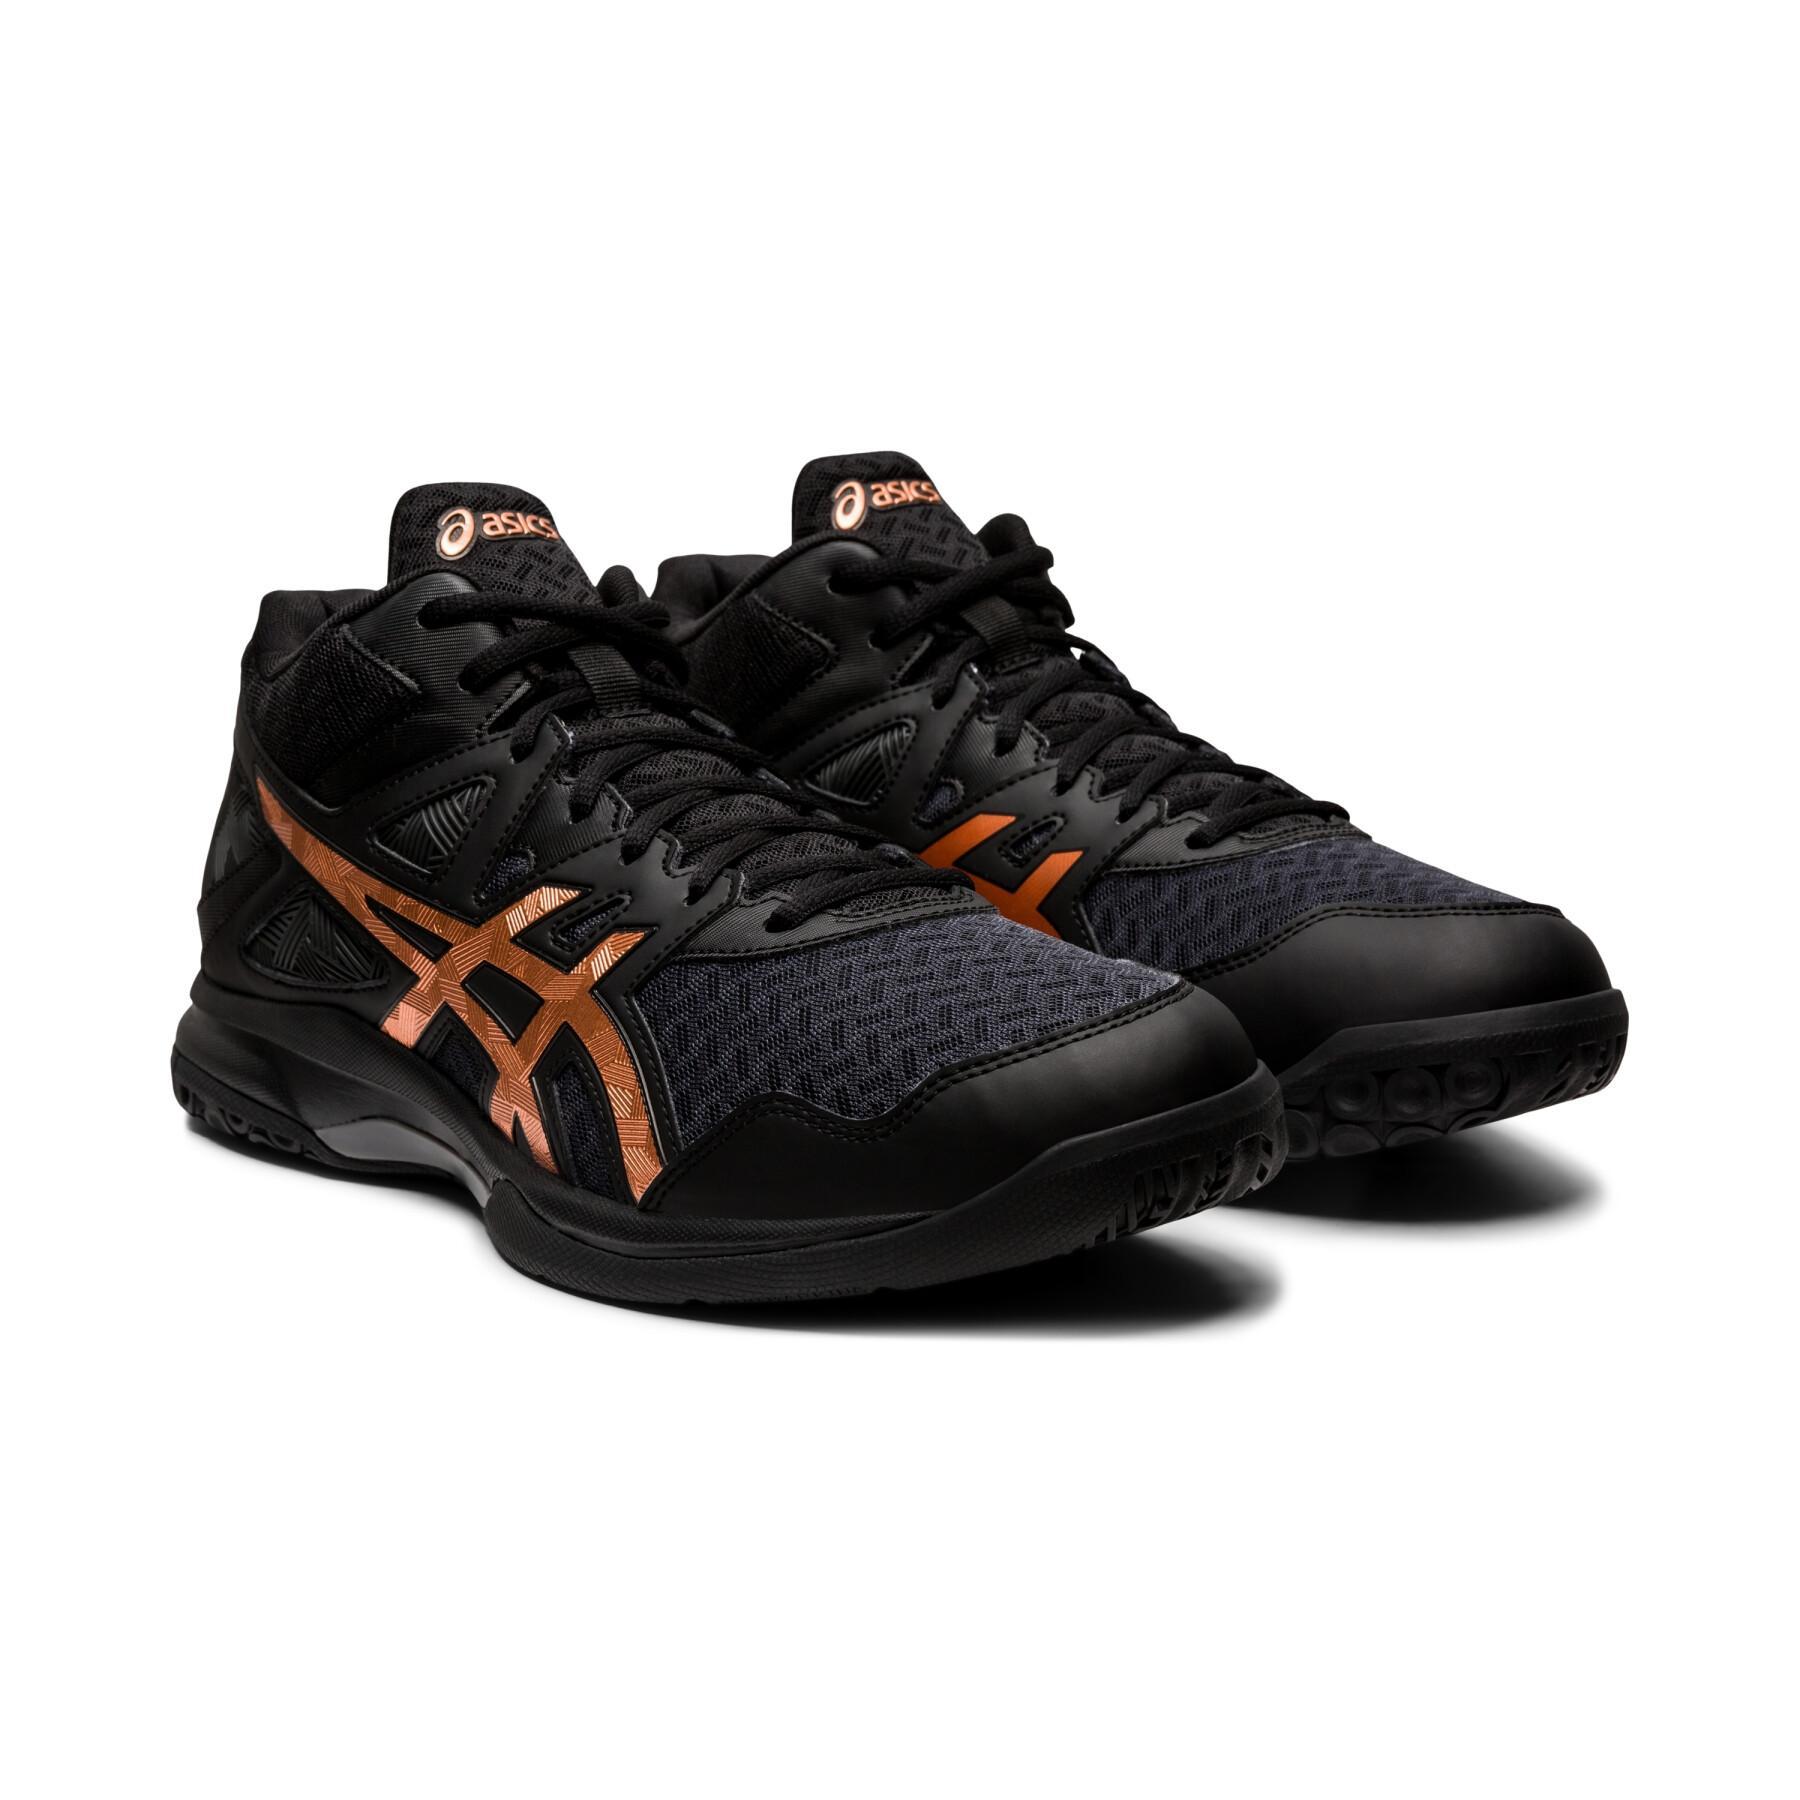 Chaussures montantes Asics Gel-task 2